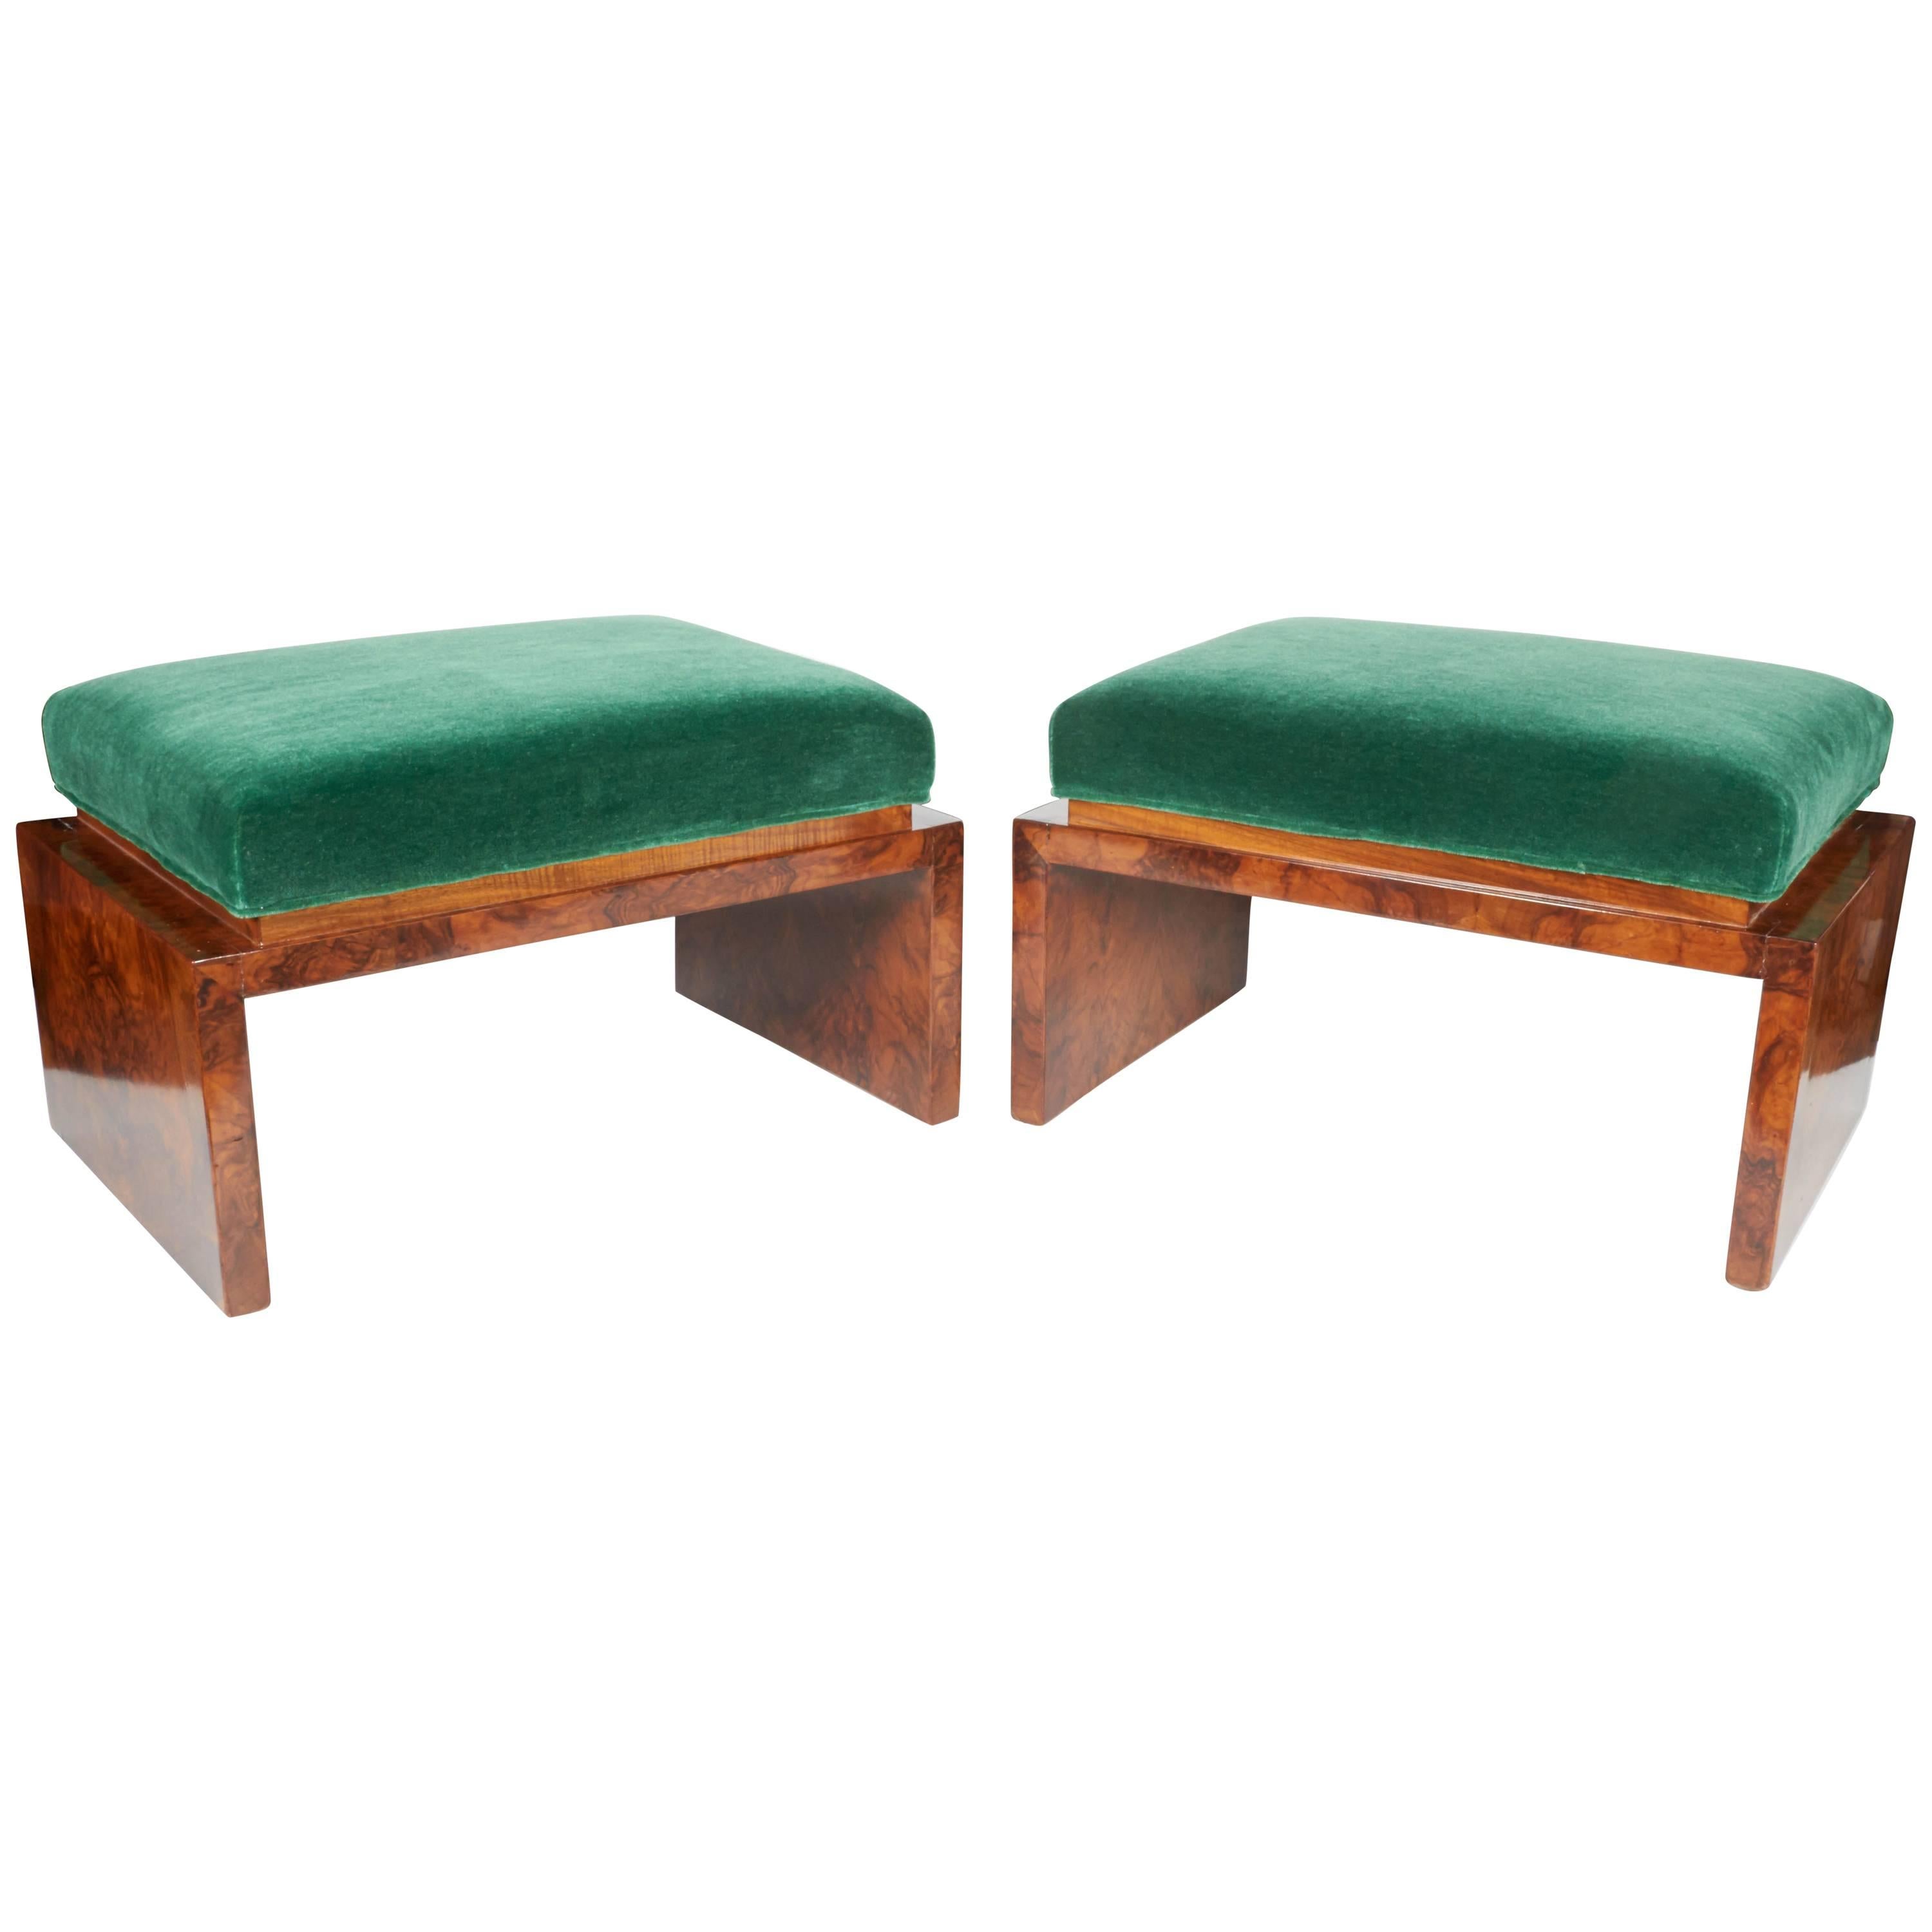 Rare Art Deco Low Benches in Emerald Mohair and Burled Carpathian Elm